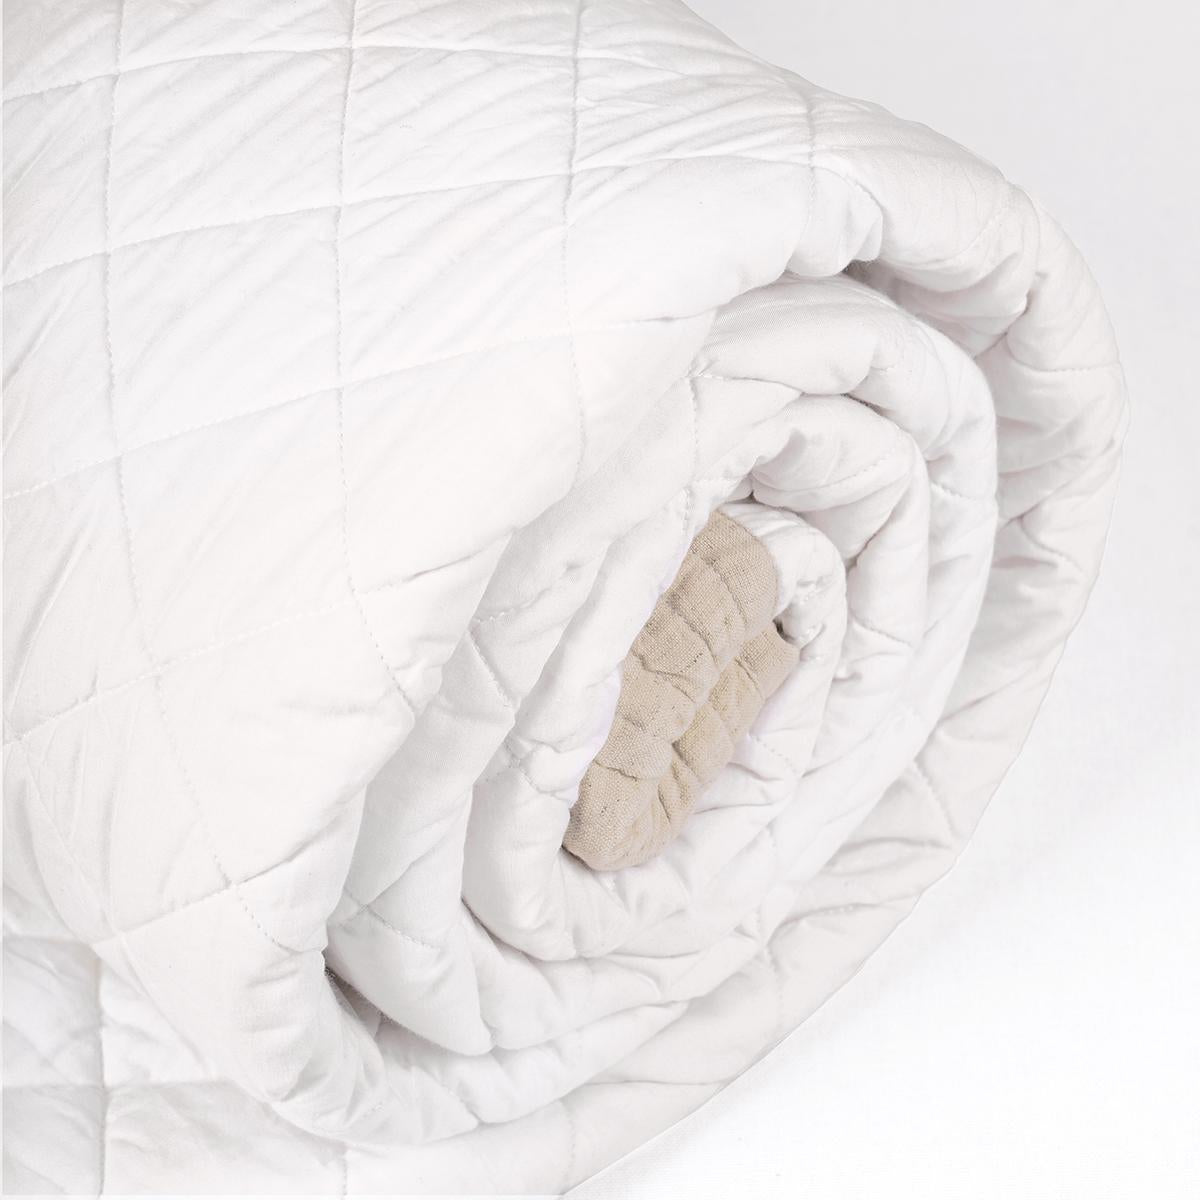 SHWET - Natural and White quilted bedspread, cotton and cotton flex quilt, 100% cotton, Sizes available